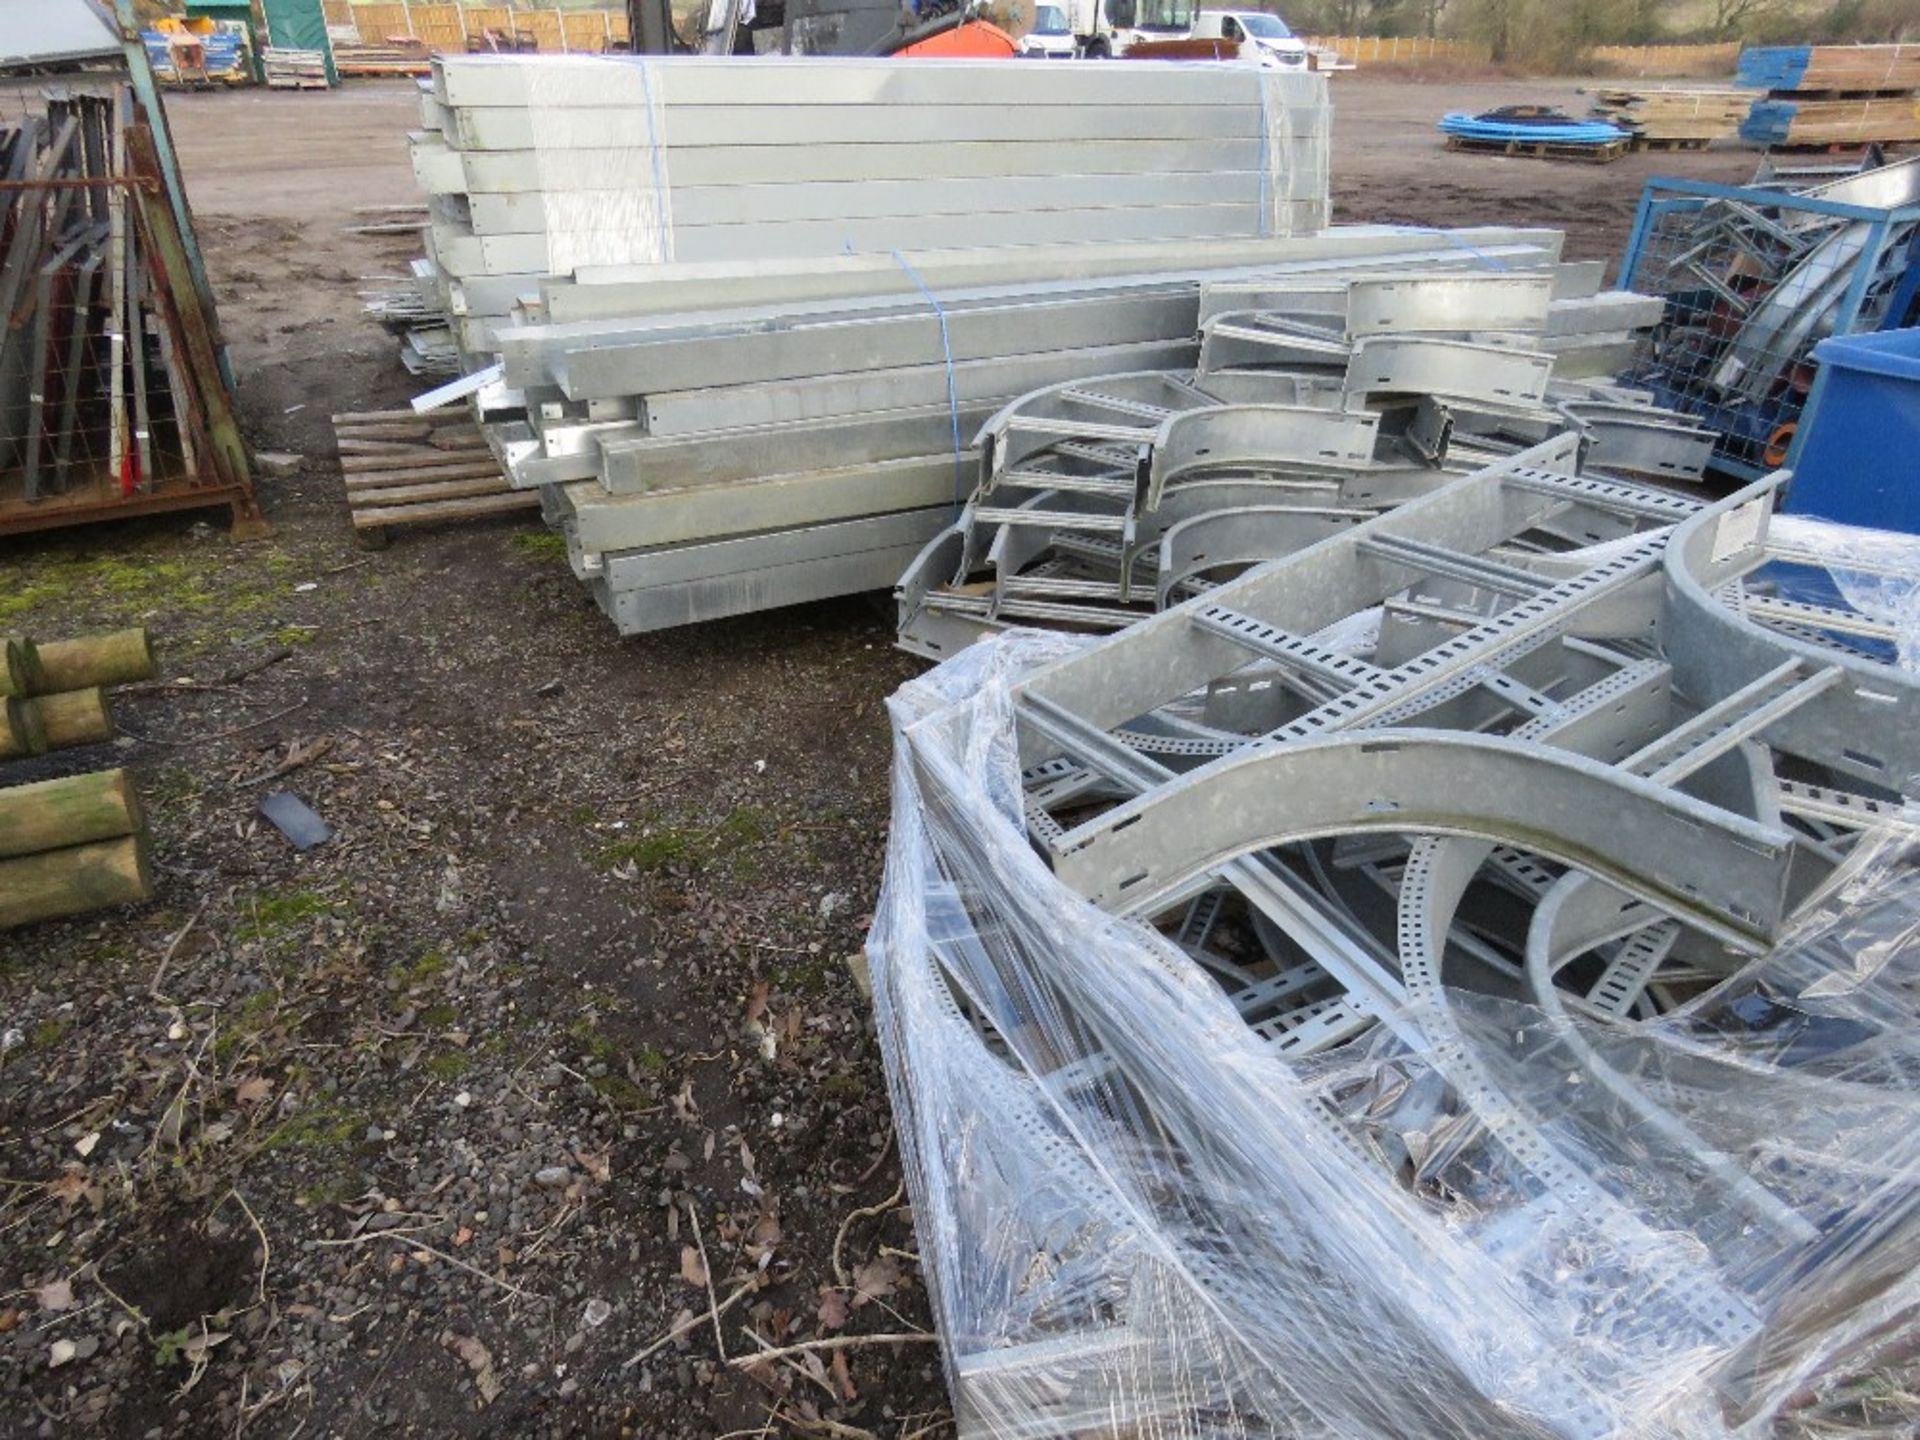 LARGE QUANTITY OF METAL DUCTING PARTS INCLUDING DUCTS AT 9FT LENGTH APPROX. SOURCED FROM COMPANY LIQ - Image 6 of 9